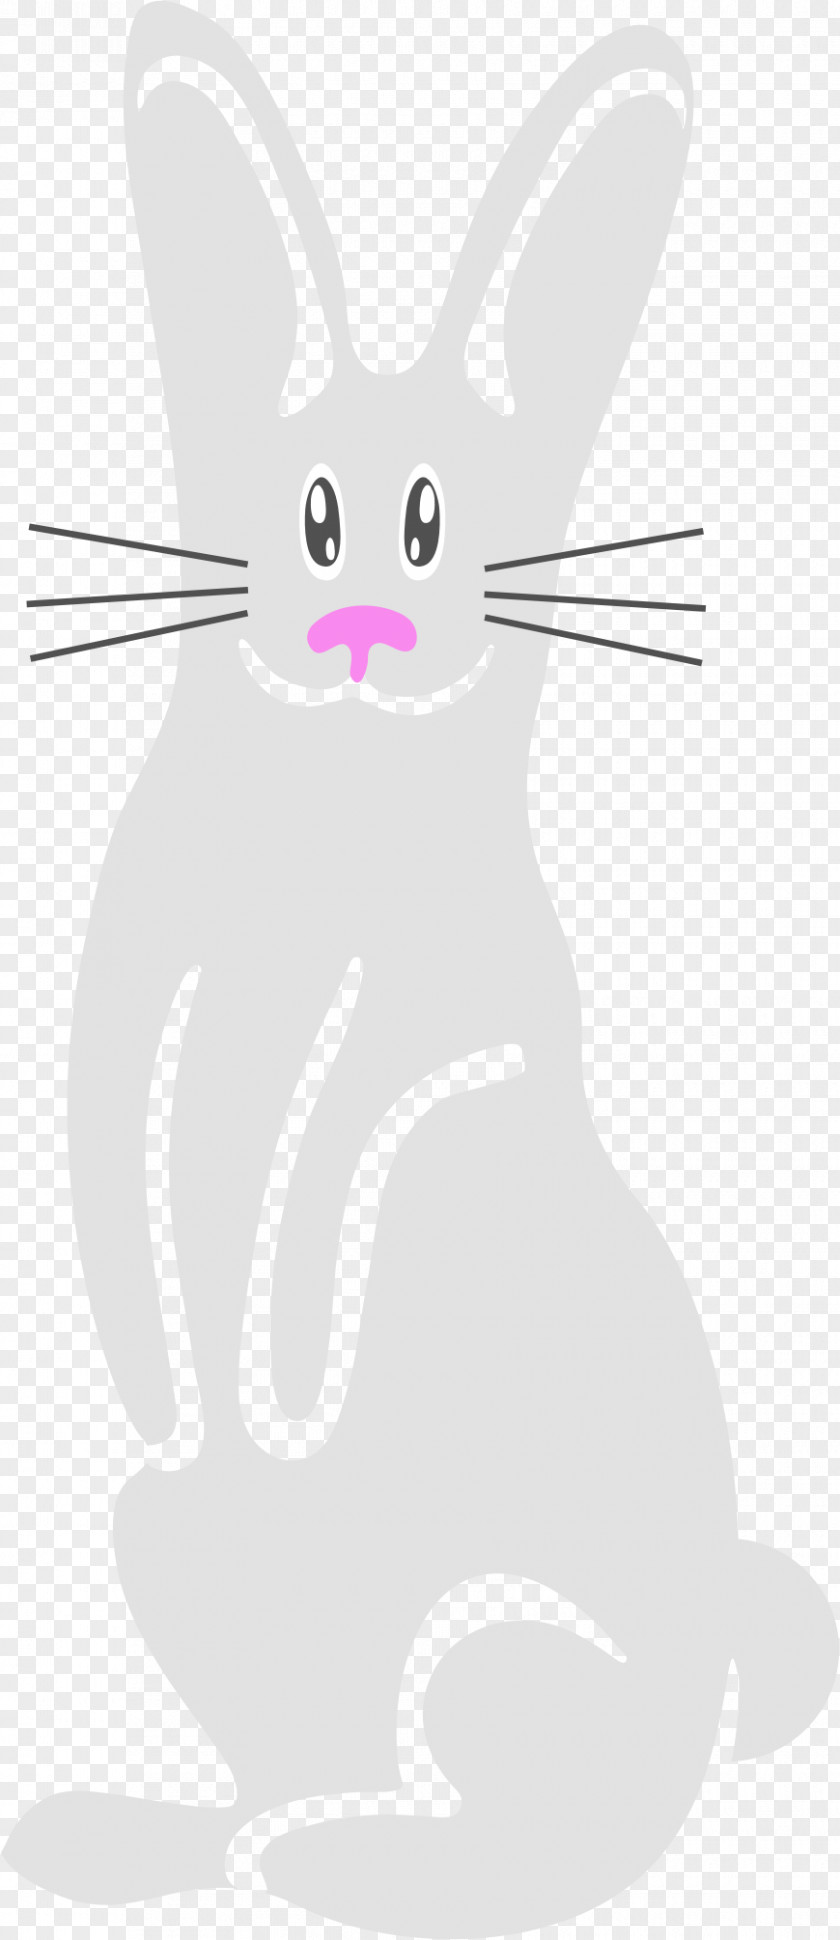 Easter Rabbit Cat Hare Domestic Bunny PNG